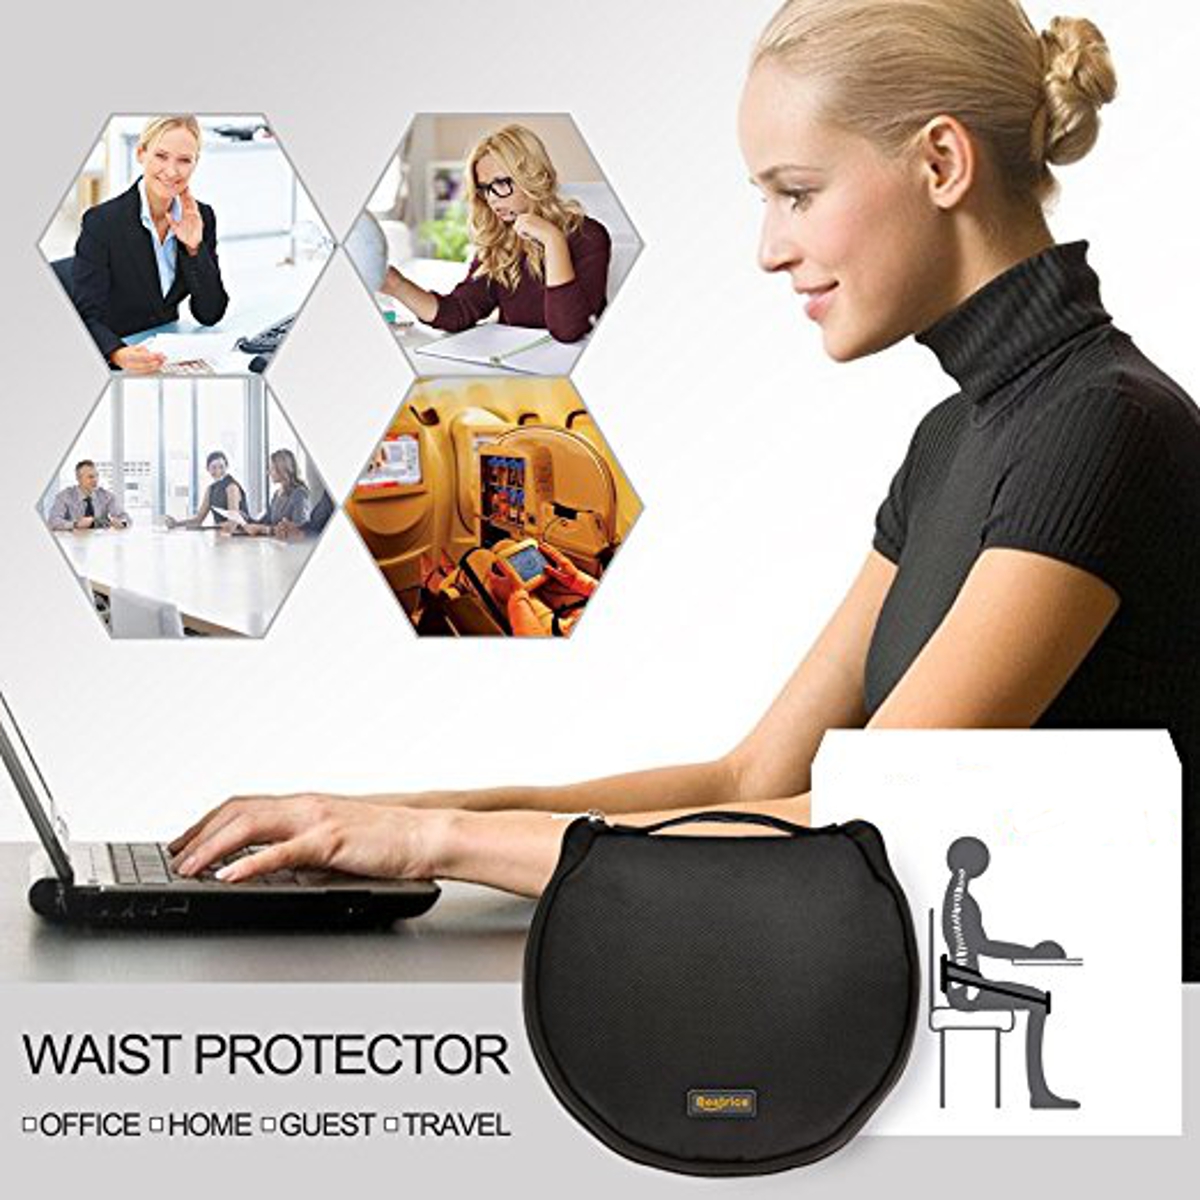 Adjustable-Waist-Protector-Portable-Back-Support-Belt-Pad-Posture-Corrector-Support-Pad-Pain-Relief-1215035